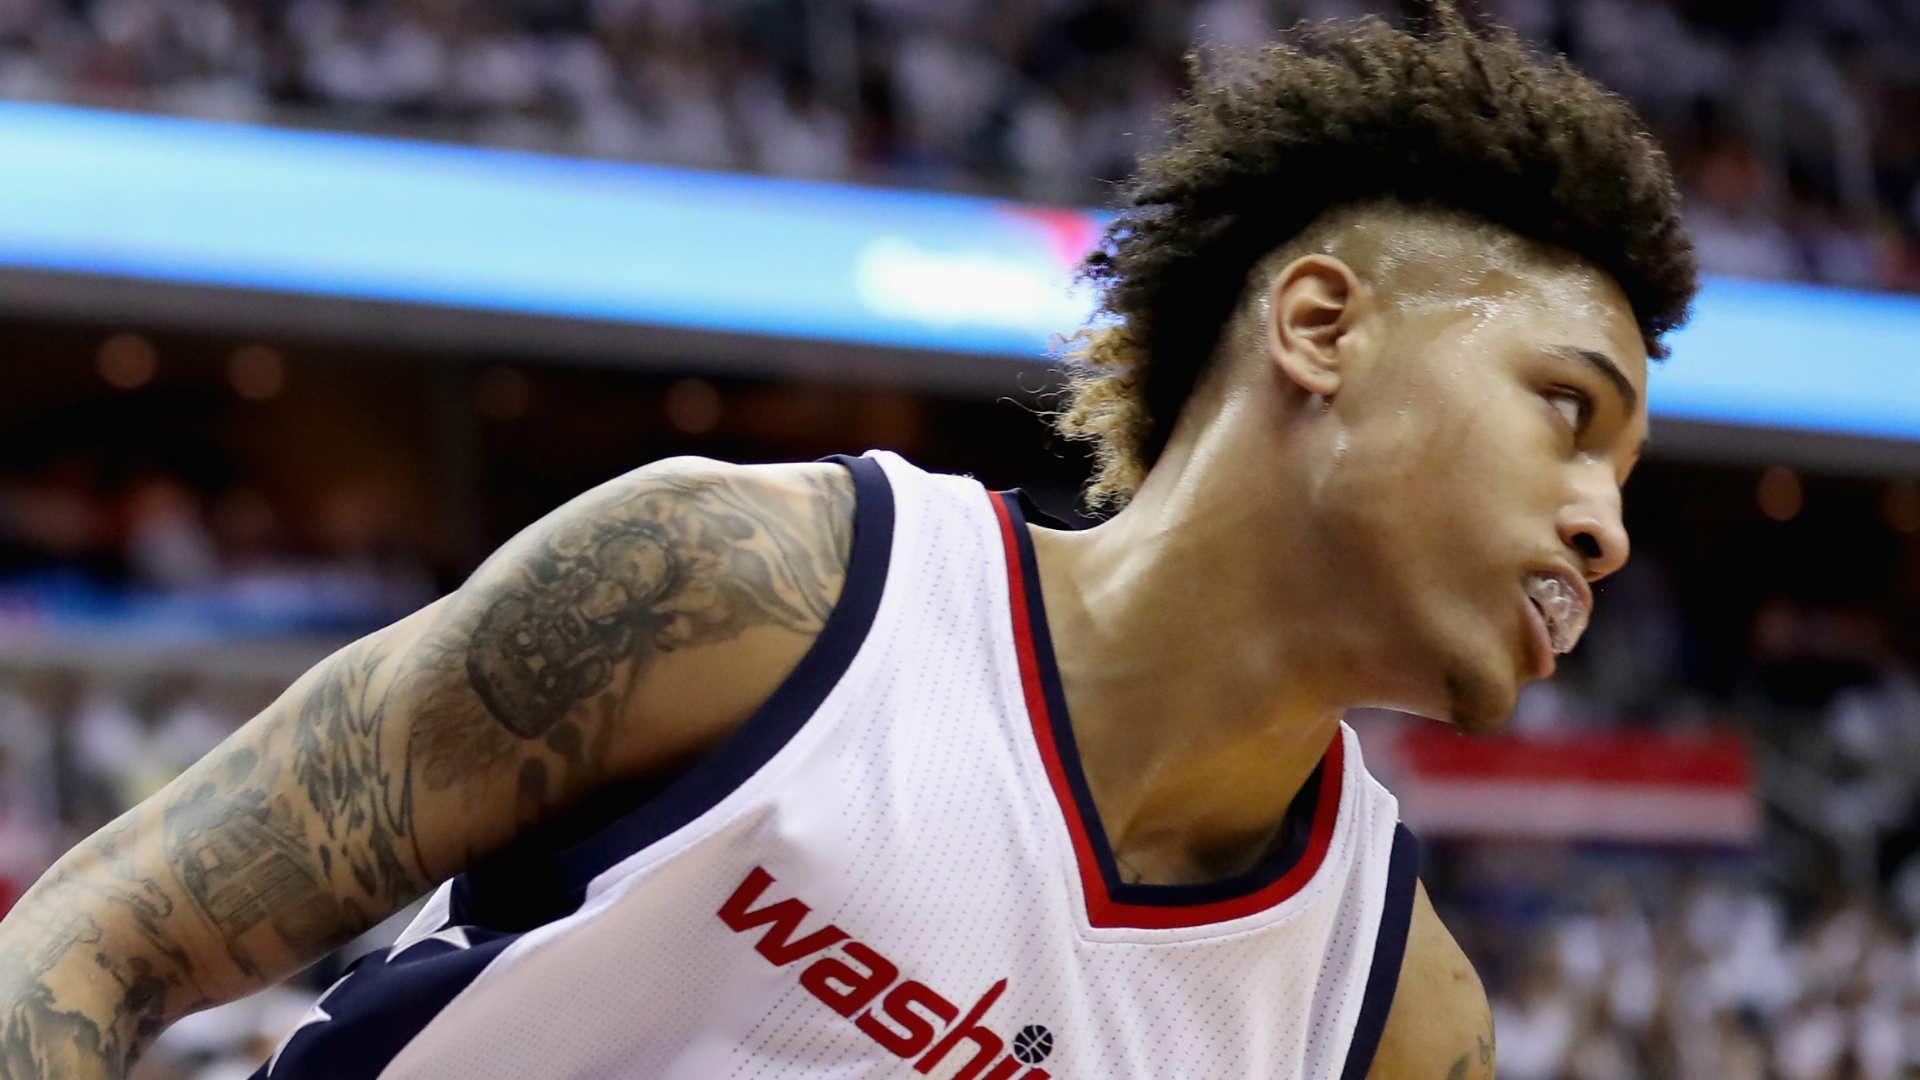 NBA To Review Kelly Oubre's Profanity Laced Jacket, Report Says